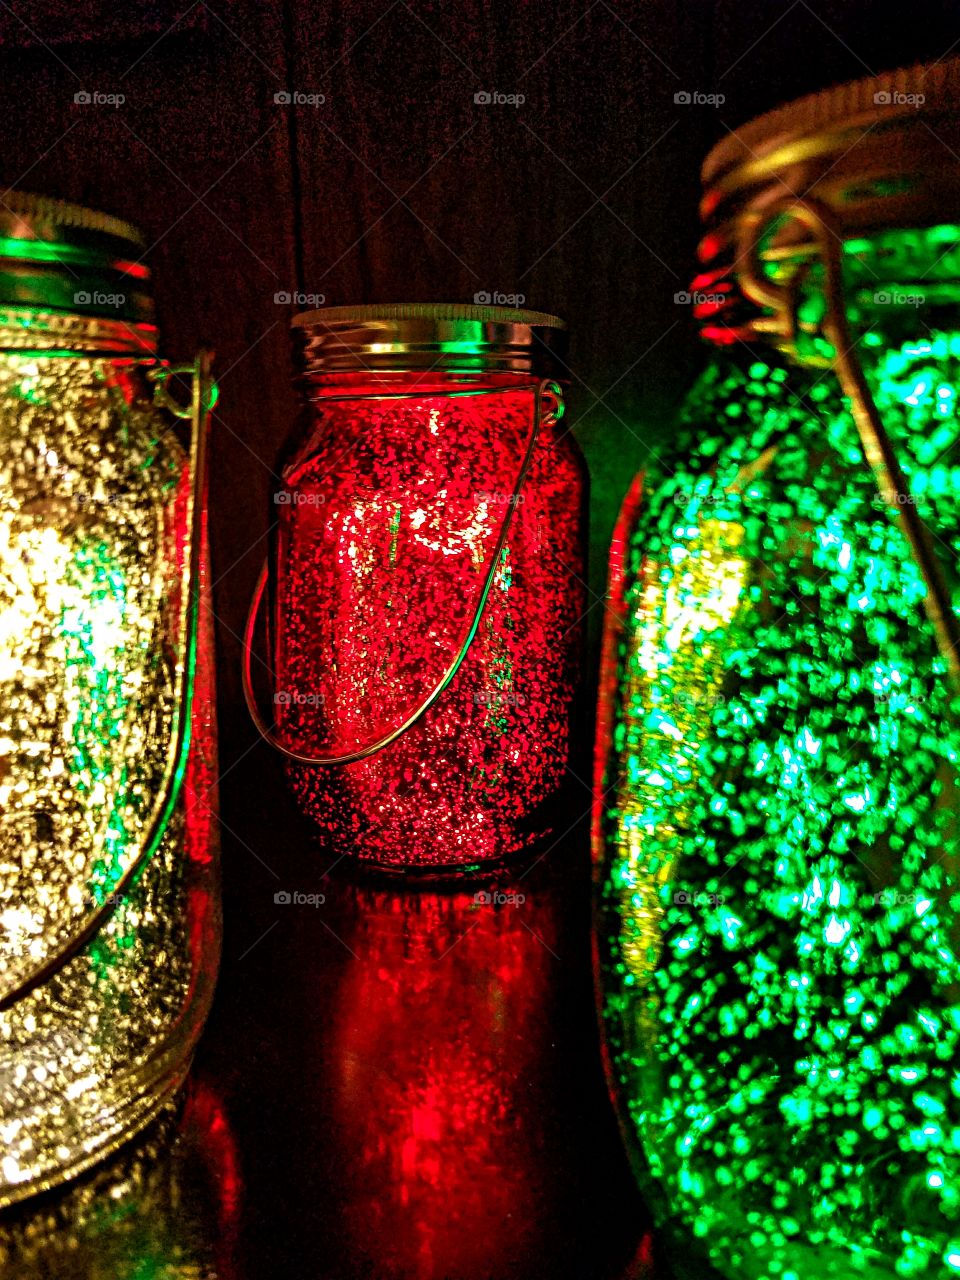 Colorful Lanterns for the Christmas Holidays!